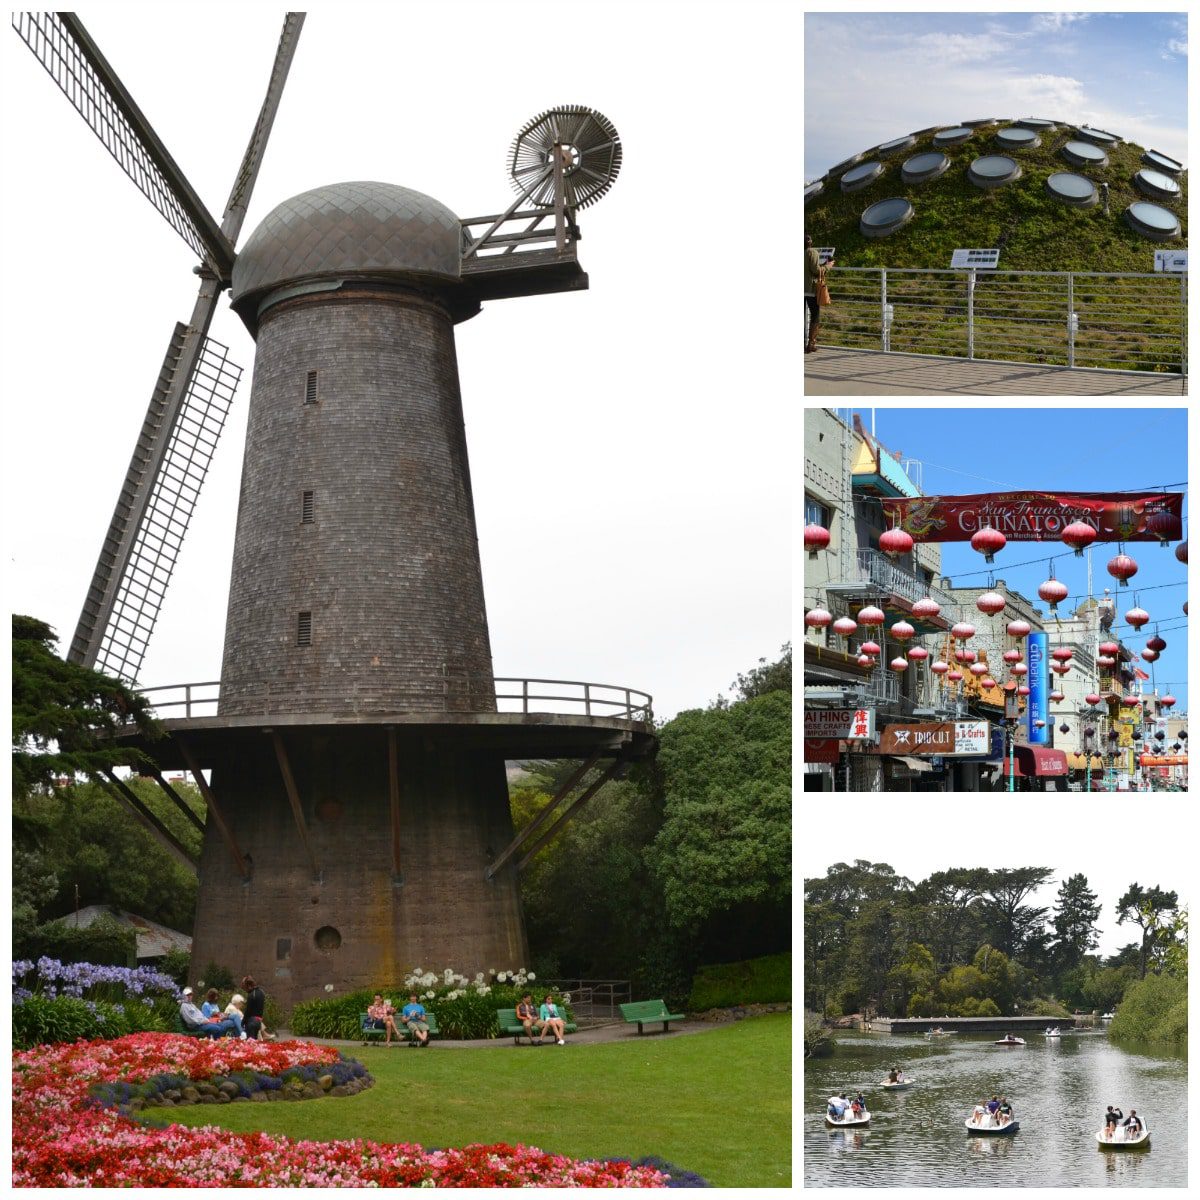 Golden Gate Park is is home to windmills, a living roof at California Academy of Sciences, Stow Lake. Ride. Cable car lines run near Chinatown.